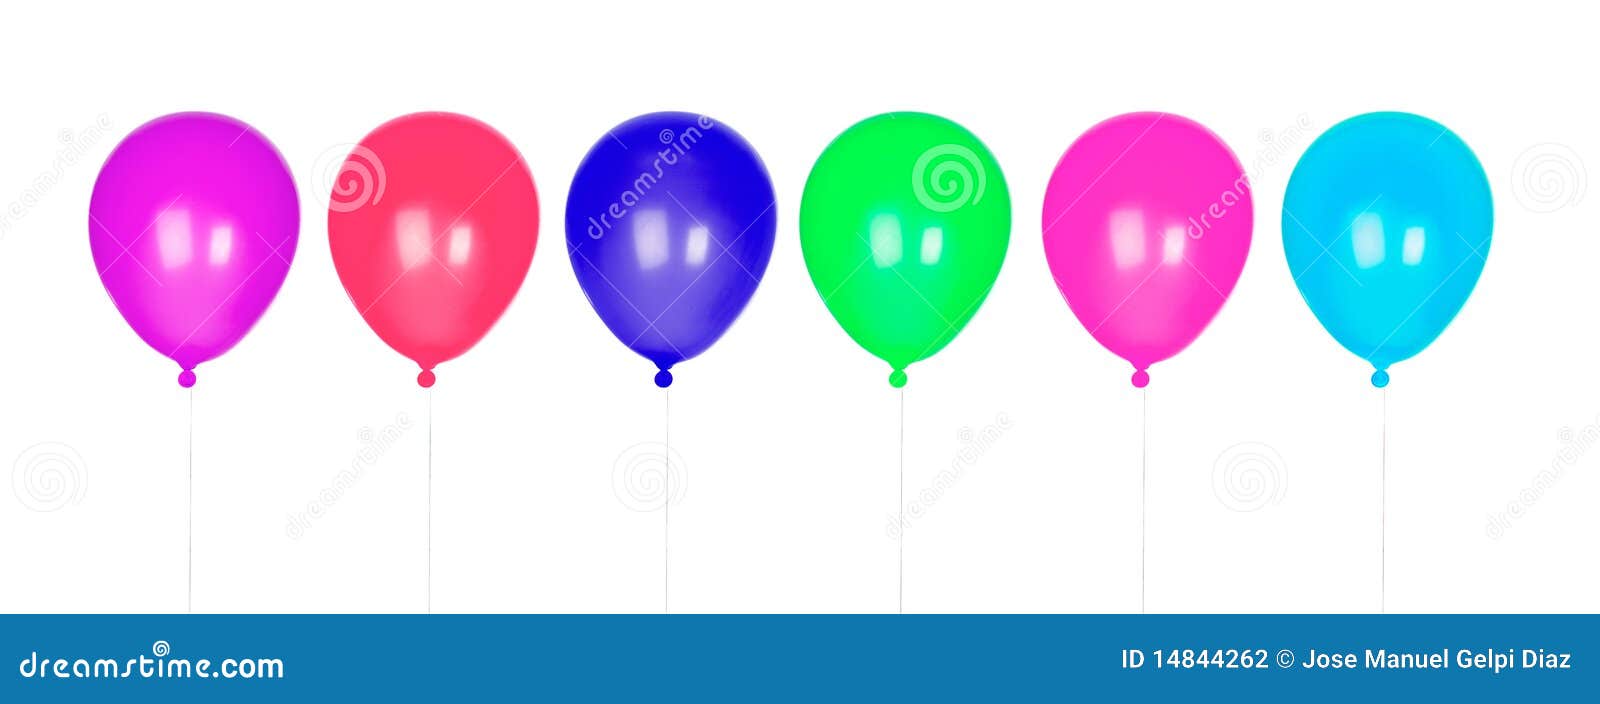 Six colorful balloons inflated